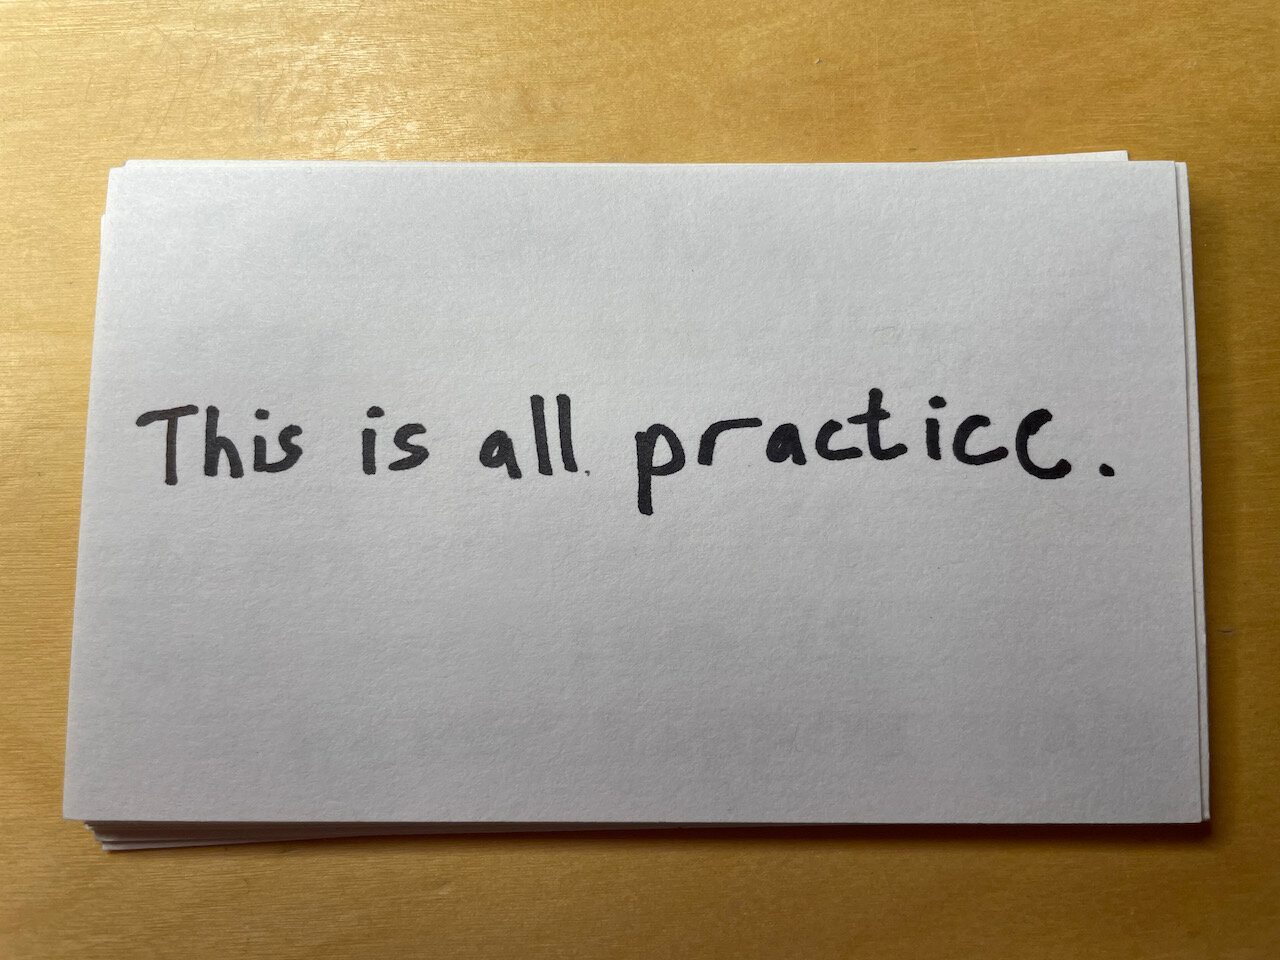 This is all practice.